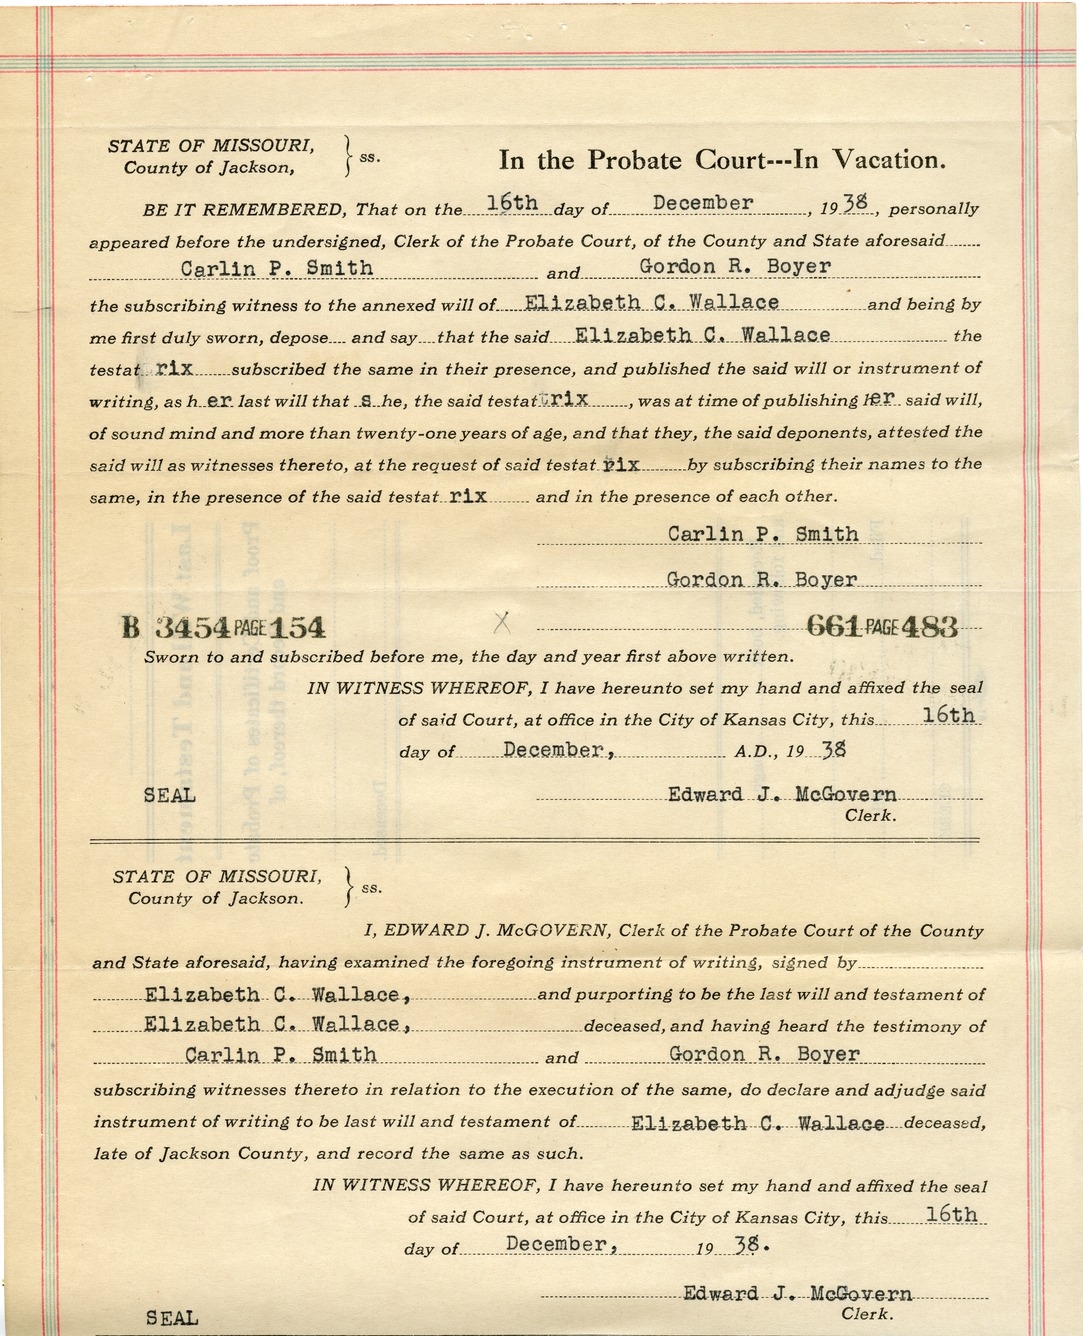 Last Will and Testament of Elizabeth C. Wallace